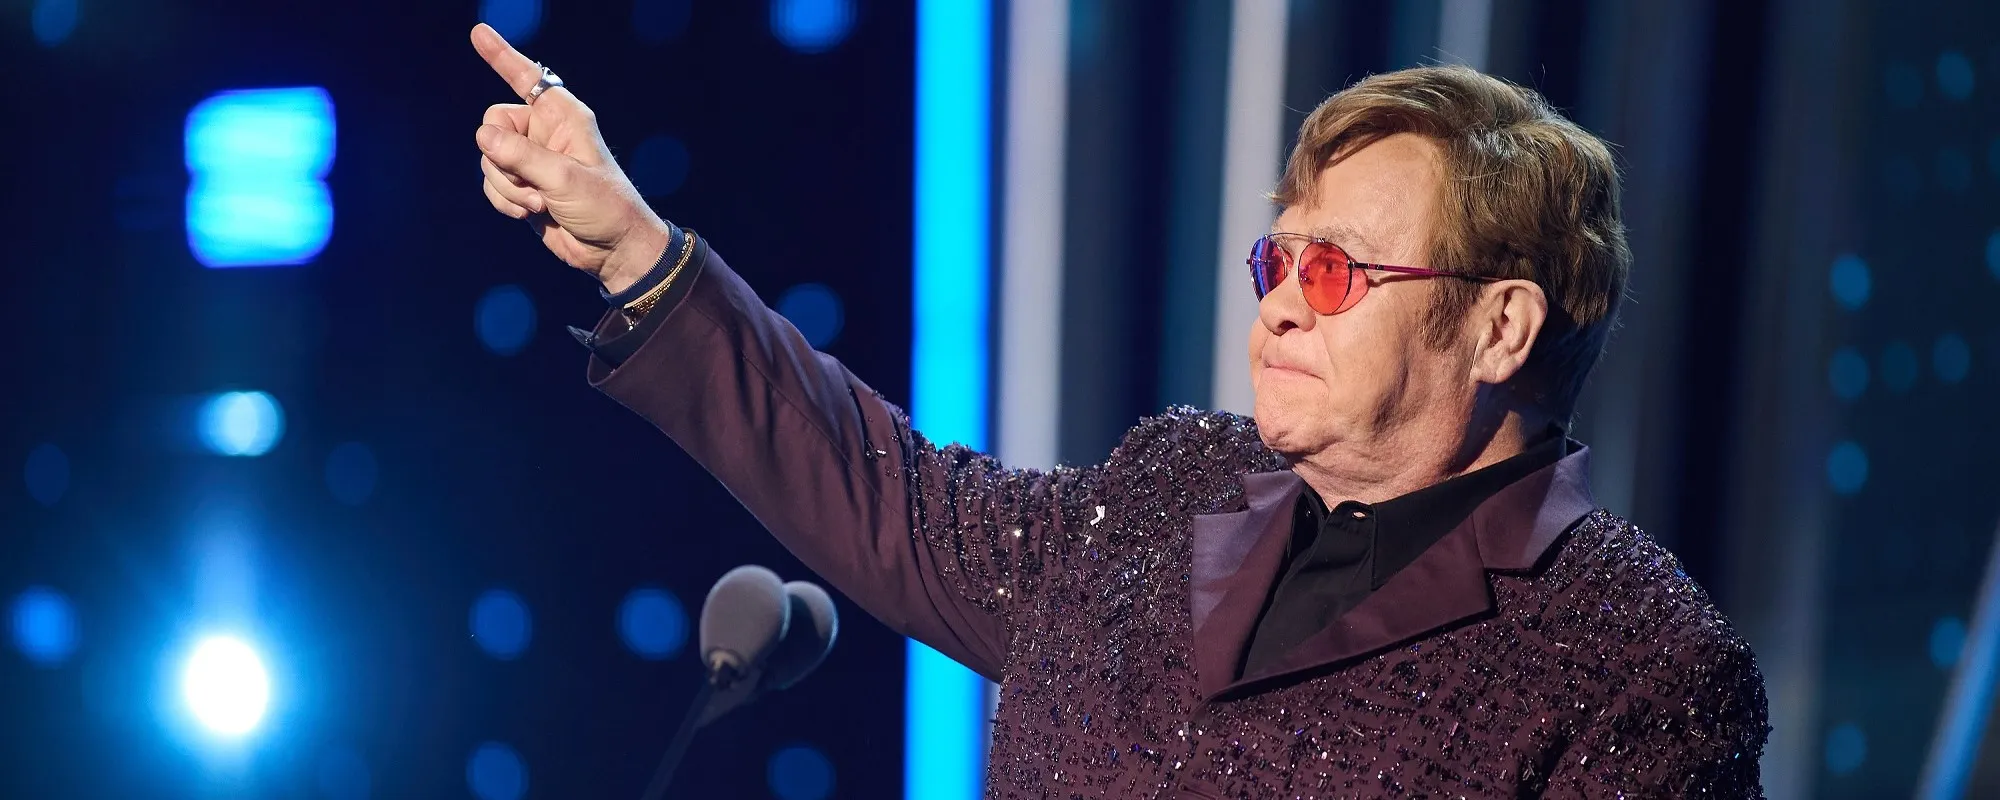 Details Emerge on New Elton John Collaborative Album: “One of the Best Things They’ve Ever Done”